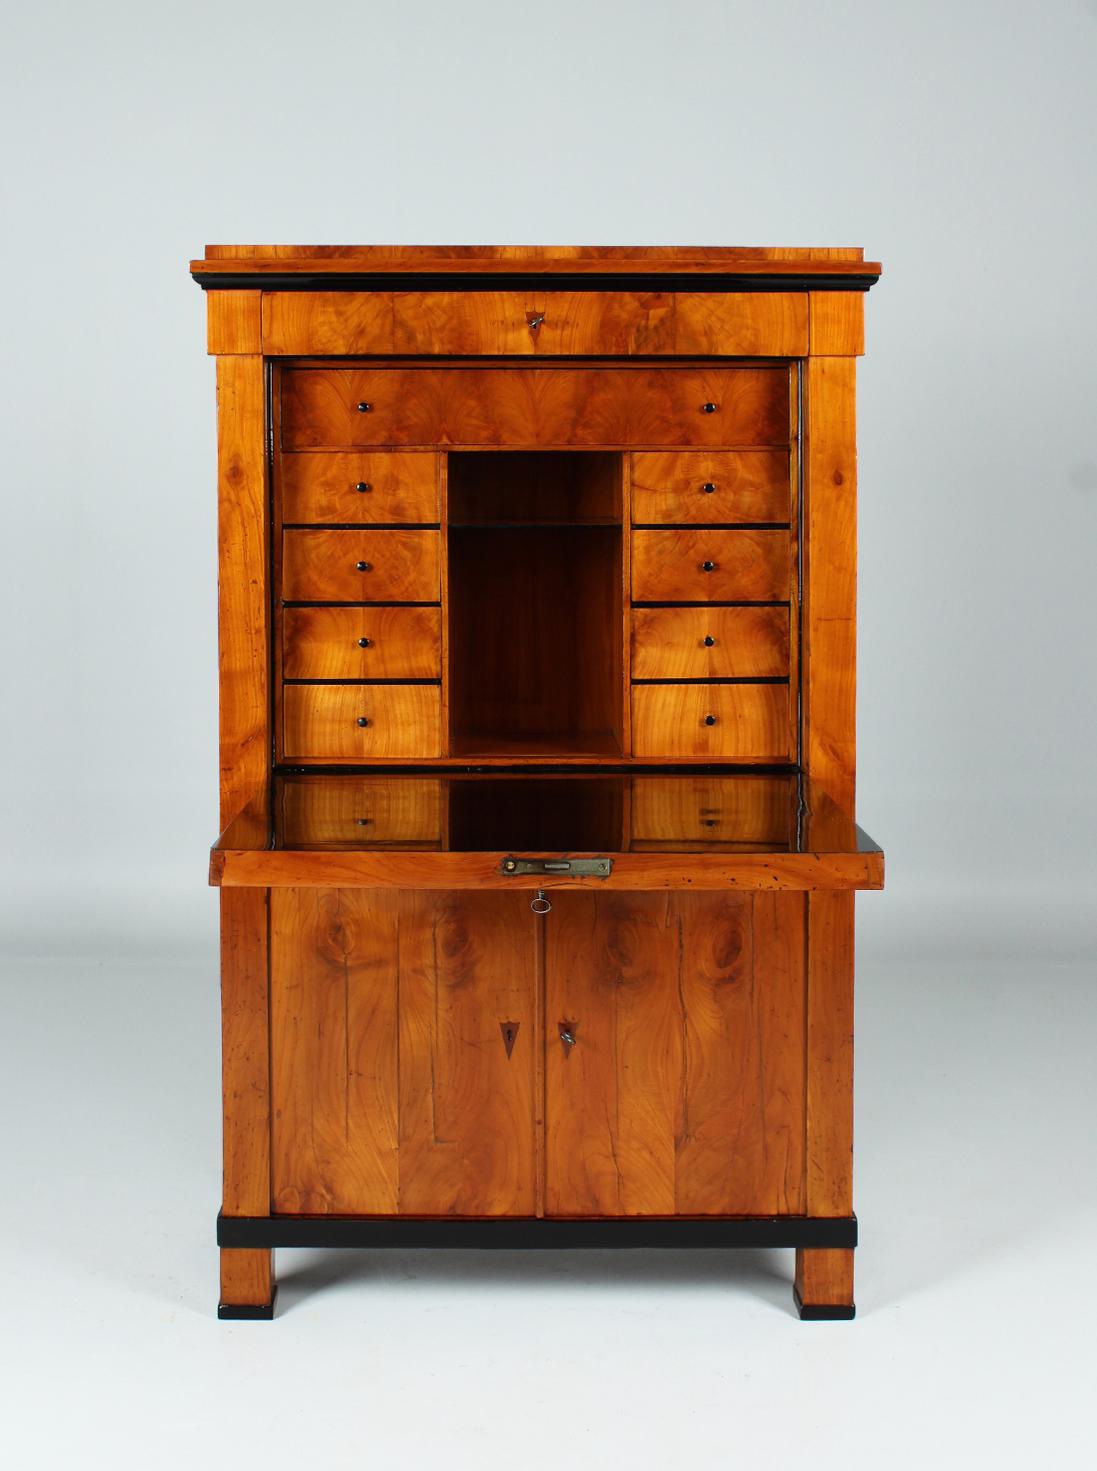 Antique cherry wood secretary

South Germany
Cherry wood
Biedermeier around 1820

Dimensions: H x W x D: 149 x 94 x 42 cm

Description:
Writing furniture standing on massive block feet with a decidedly small size. The width of 94 cm is